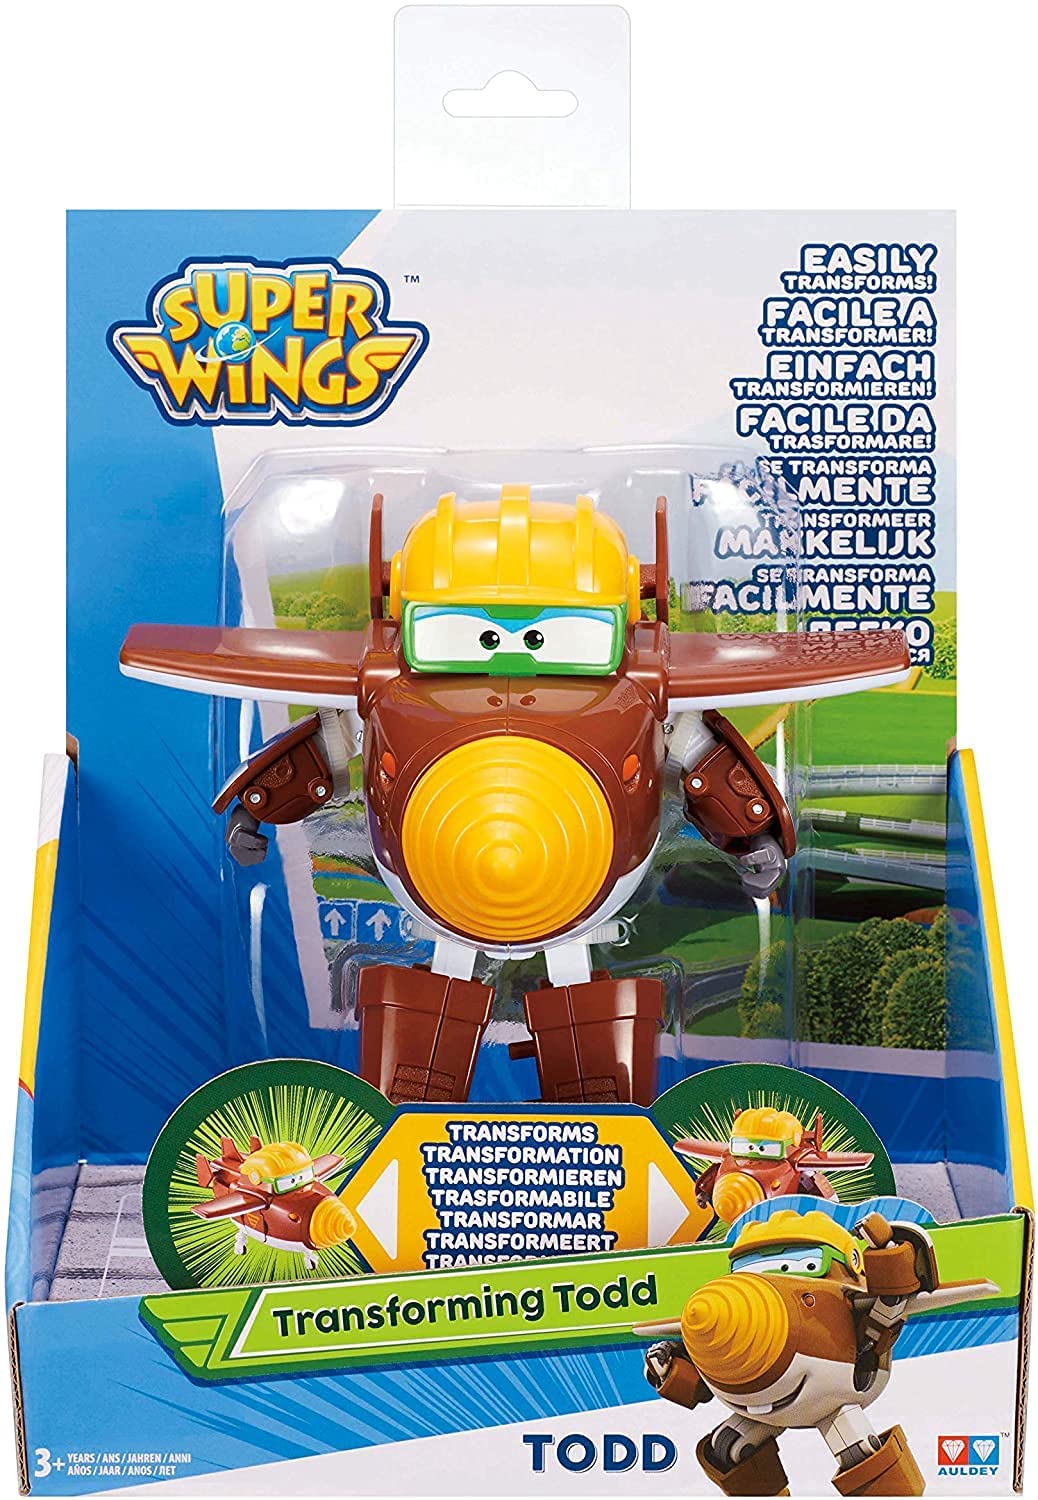 Super Wings Todd 5" Transforming Character